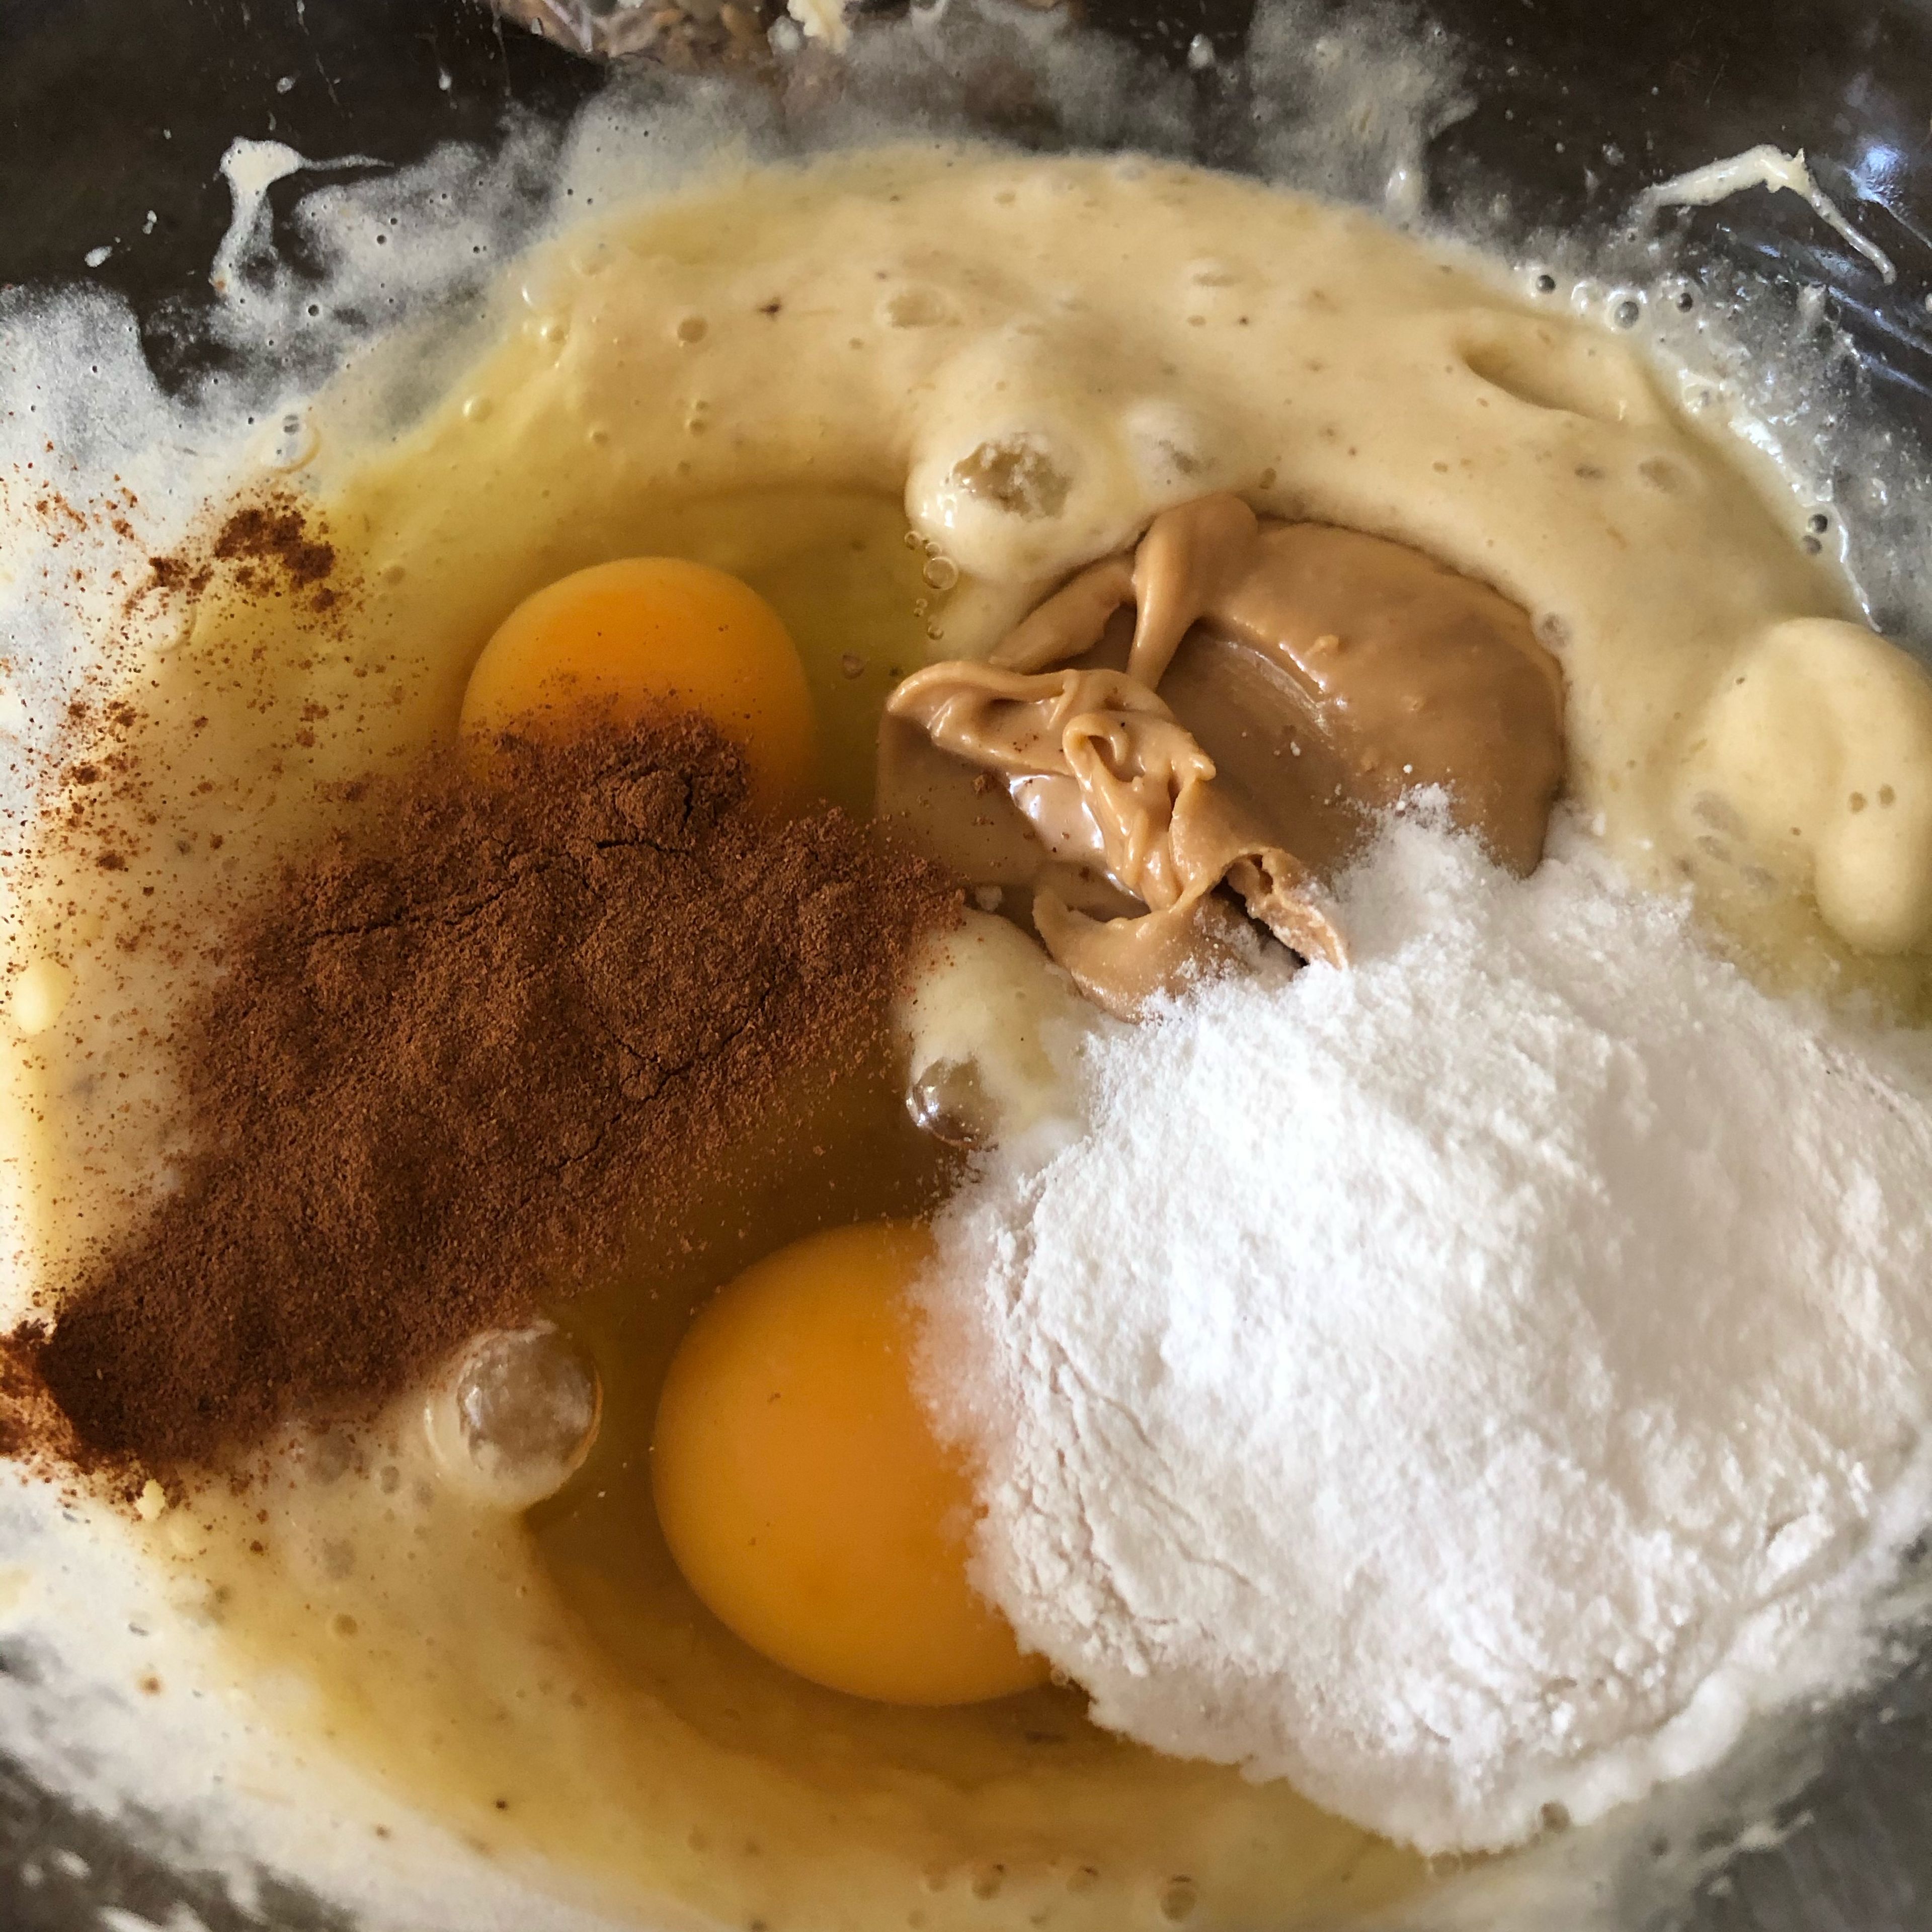 Add the eggs, ground cinnamon, peanut butter, and baking powder, then mix.